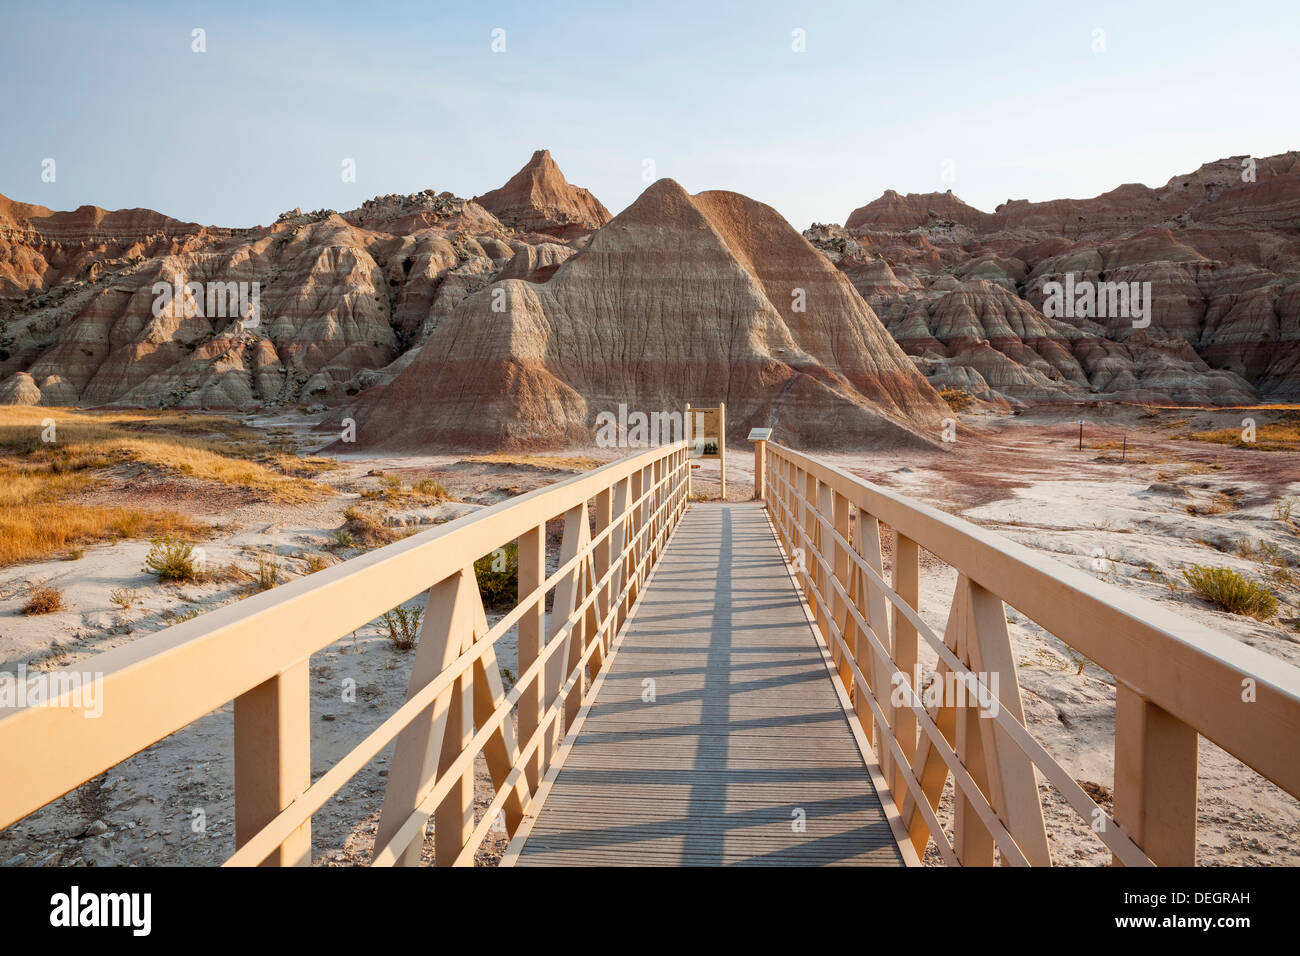 Walkway and rock formations in Badlands National Park, South Dakota Stock Photo